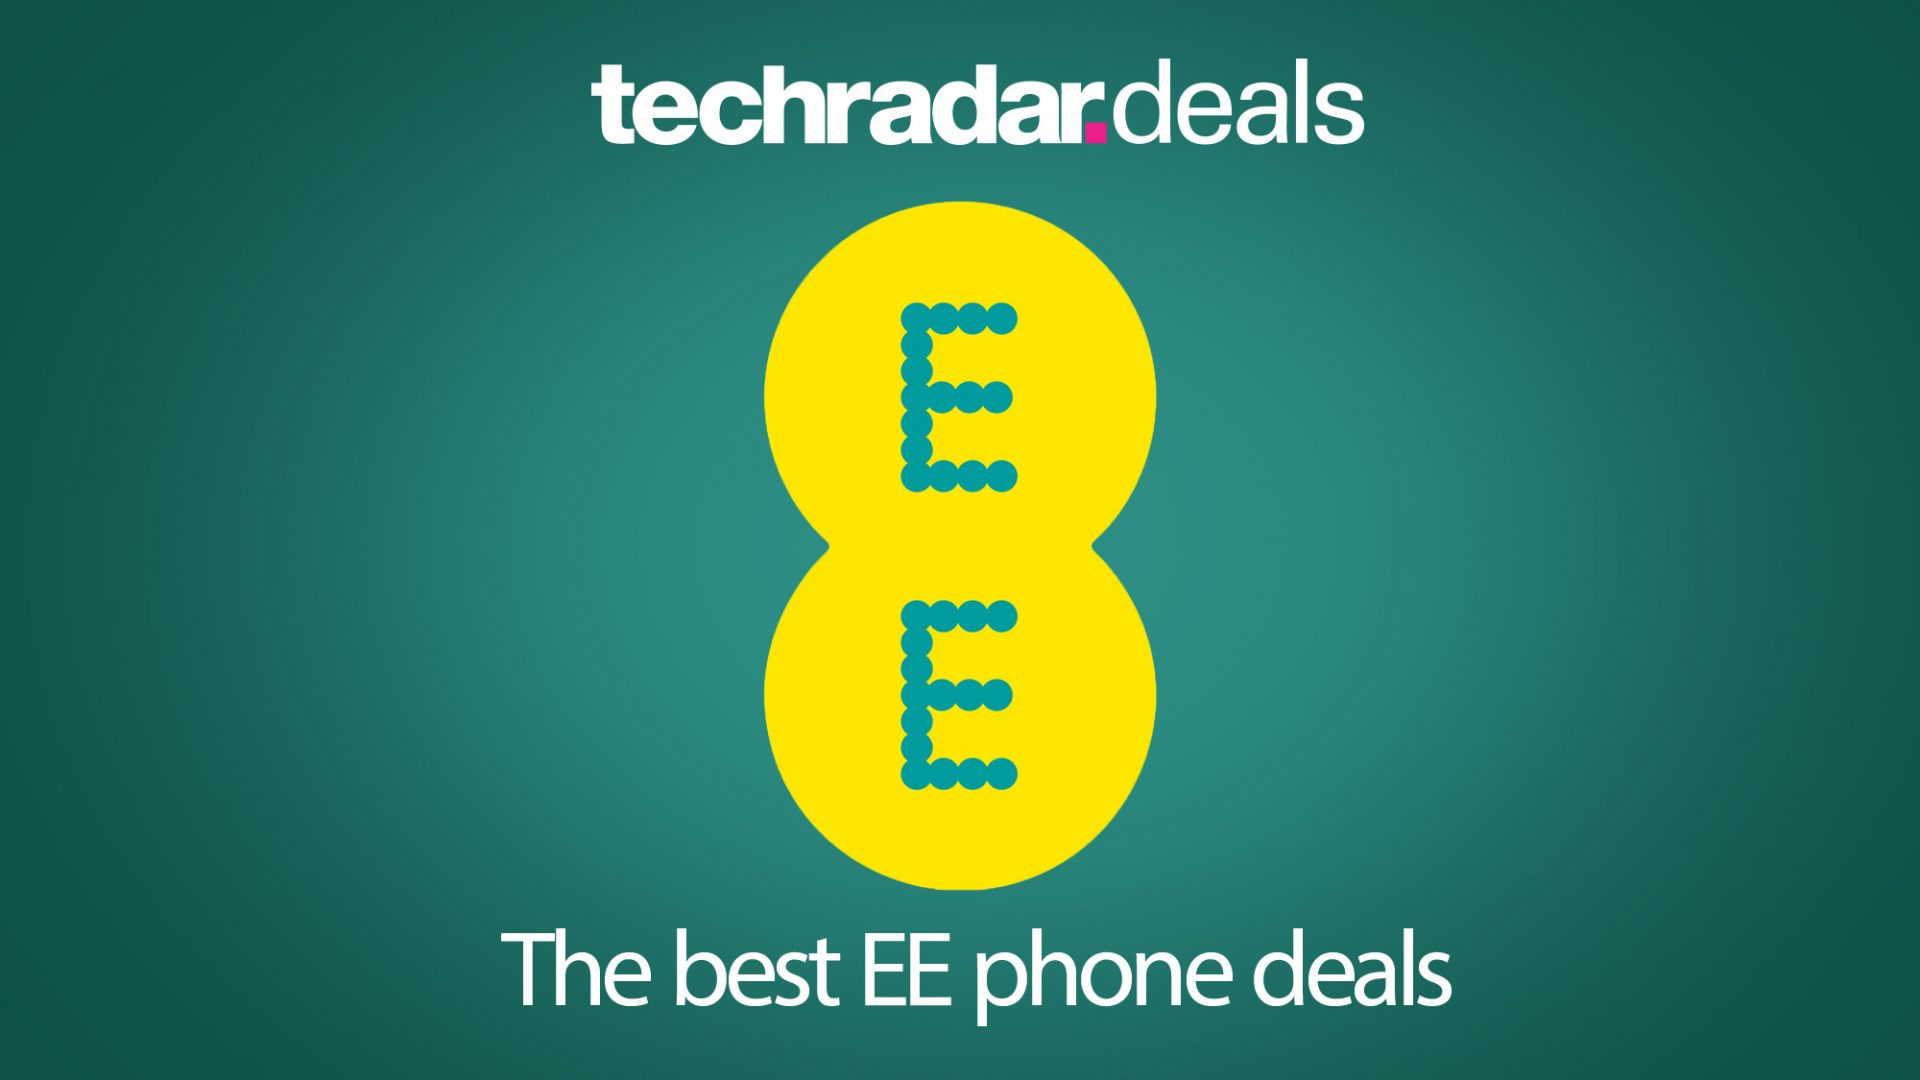 The most convenient EE mobile phone offers in June 2021